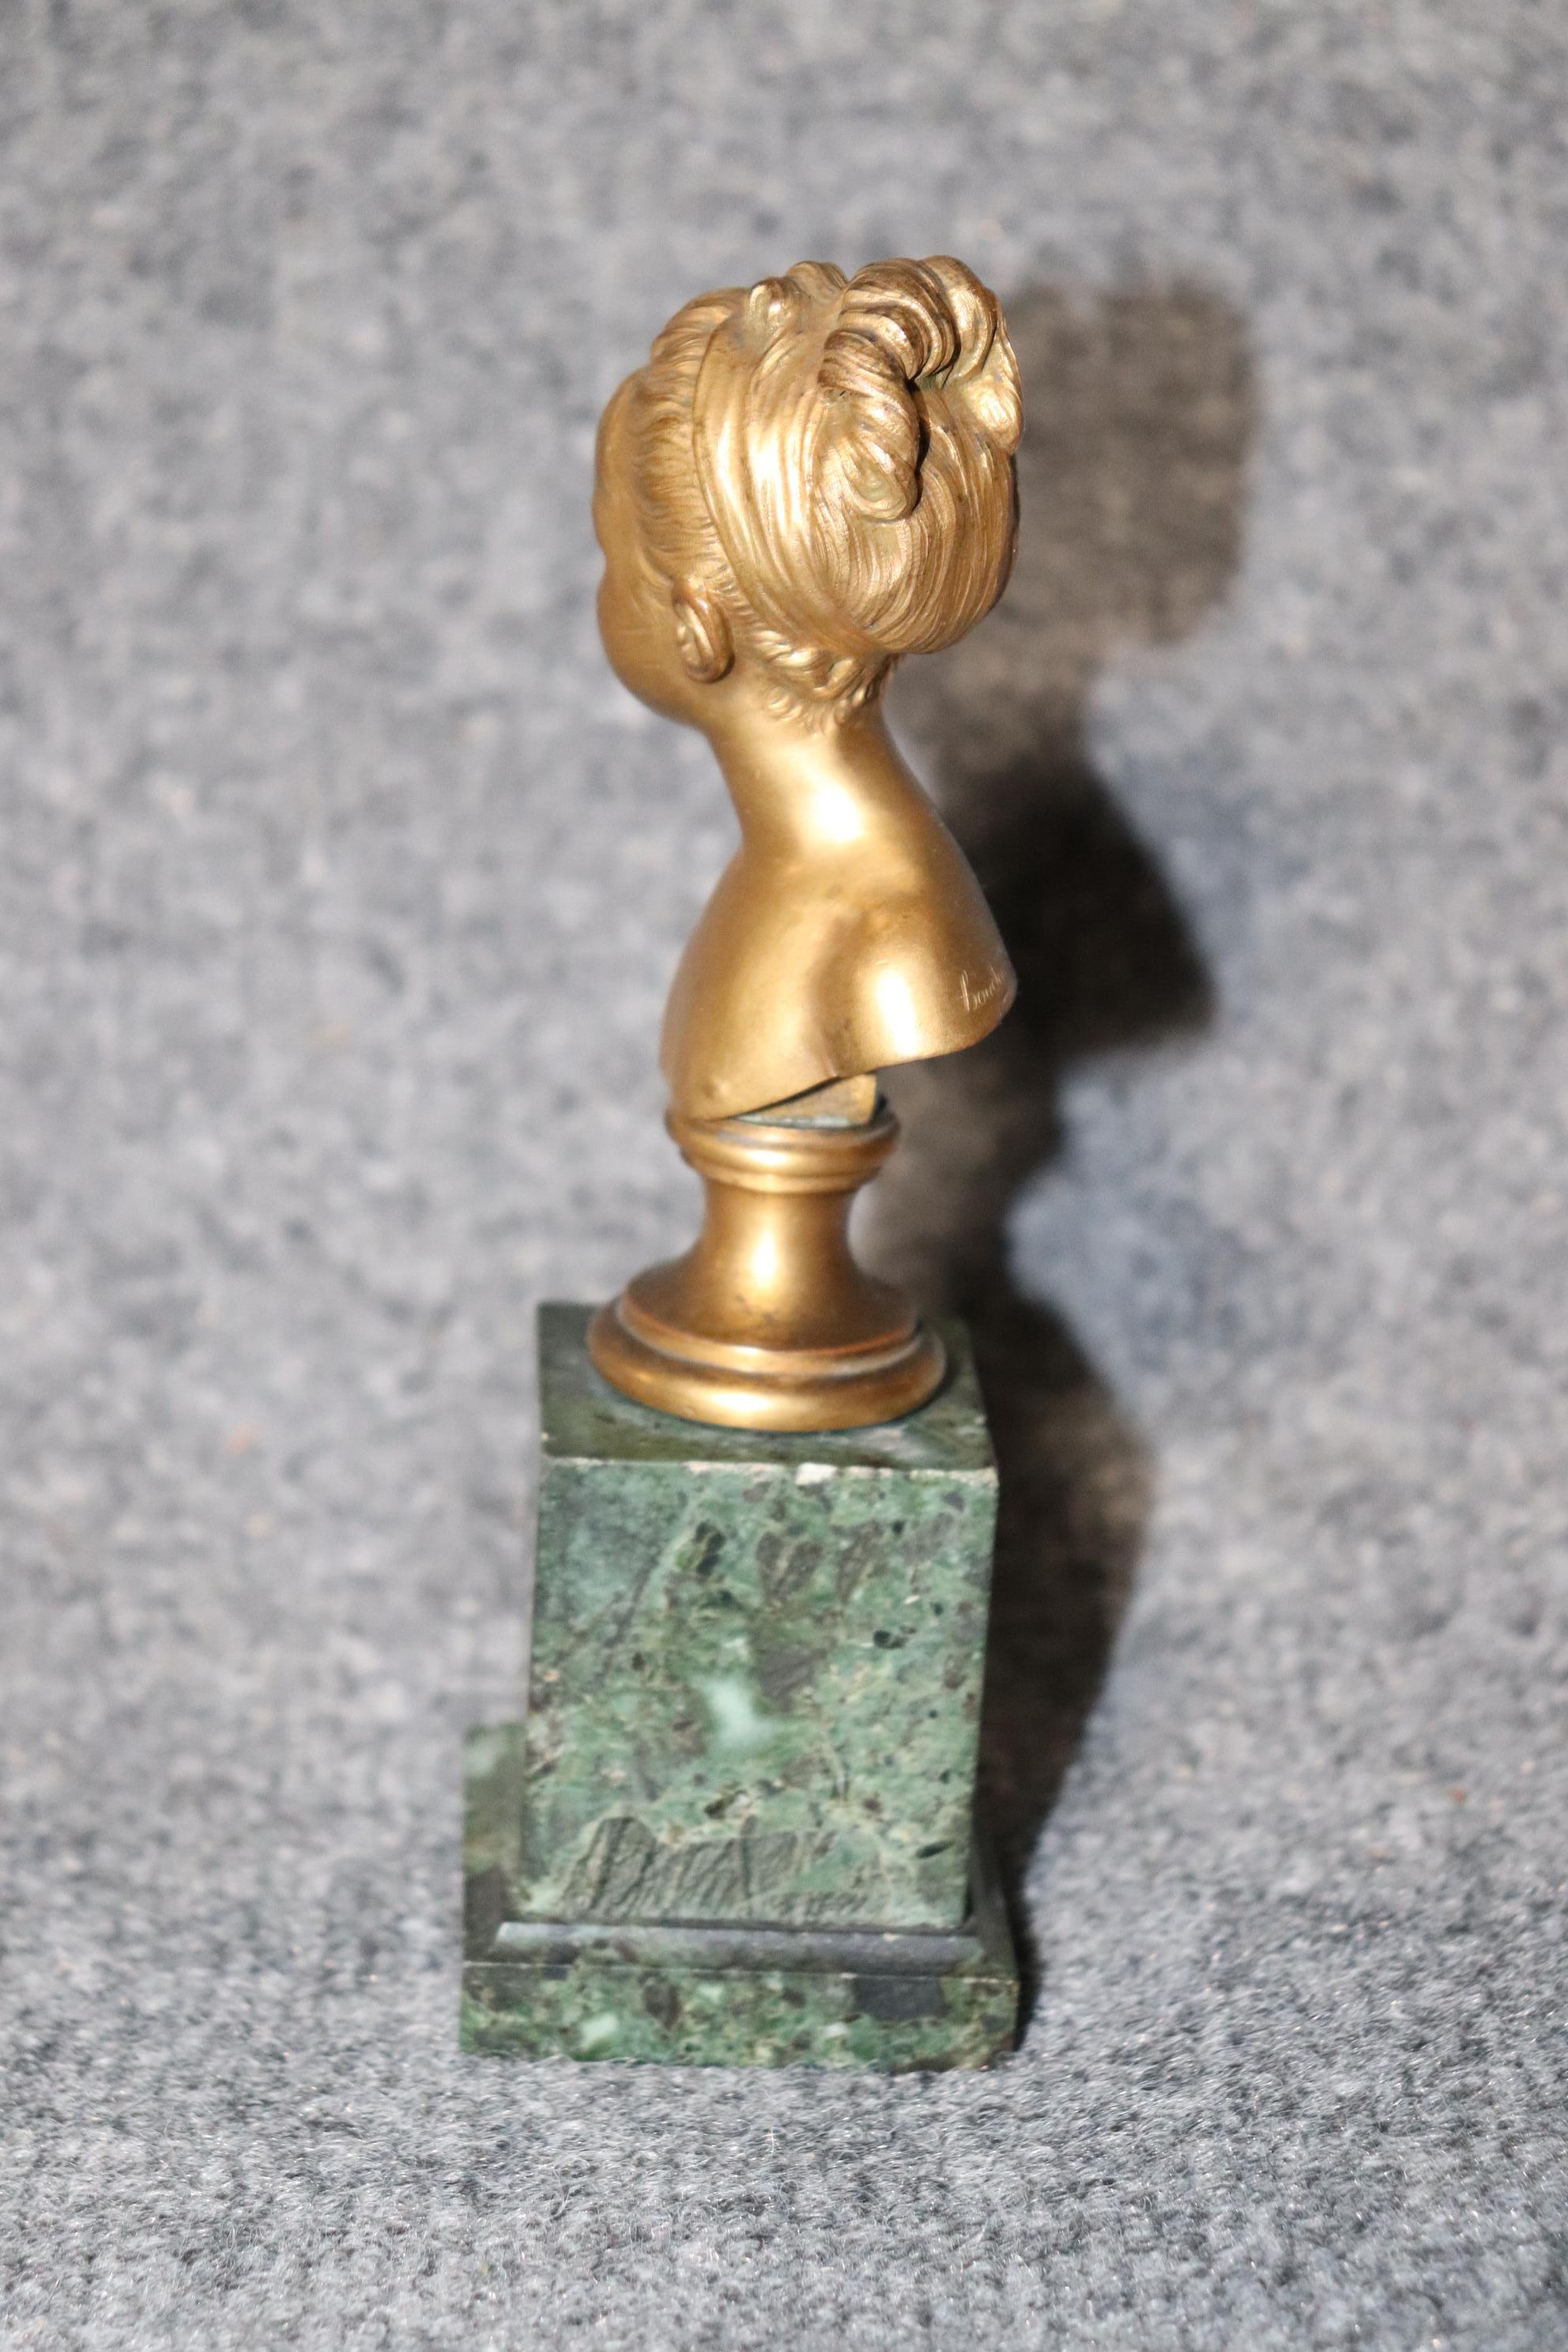 Dimensions- H: 6 1/2in W: 2 1/4in D: 2in
This Antique French Ormolu Bronze And Marble bust of Louise Brogniart After Jean Antoine Houdon And Signed Thiebaut Fréres is an incredible example of 19th century french decor! This piece is made of bronze